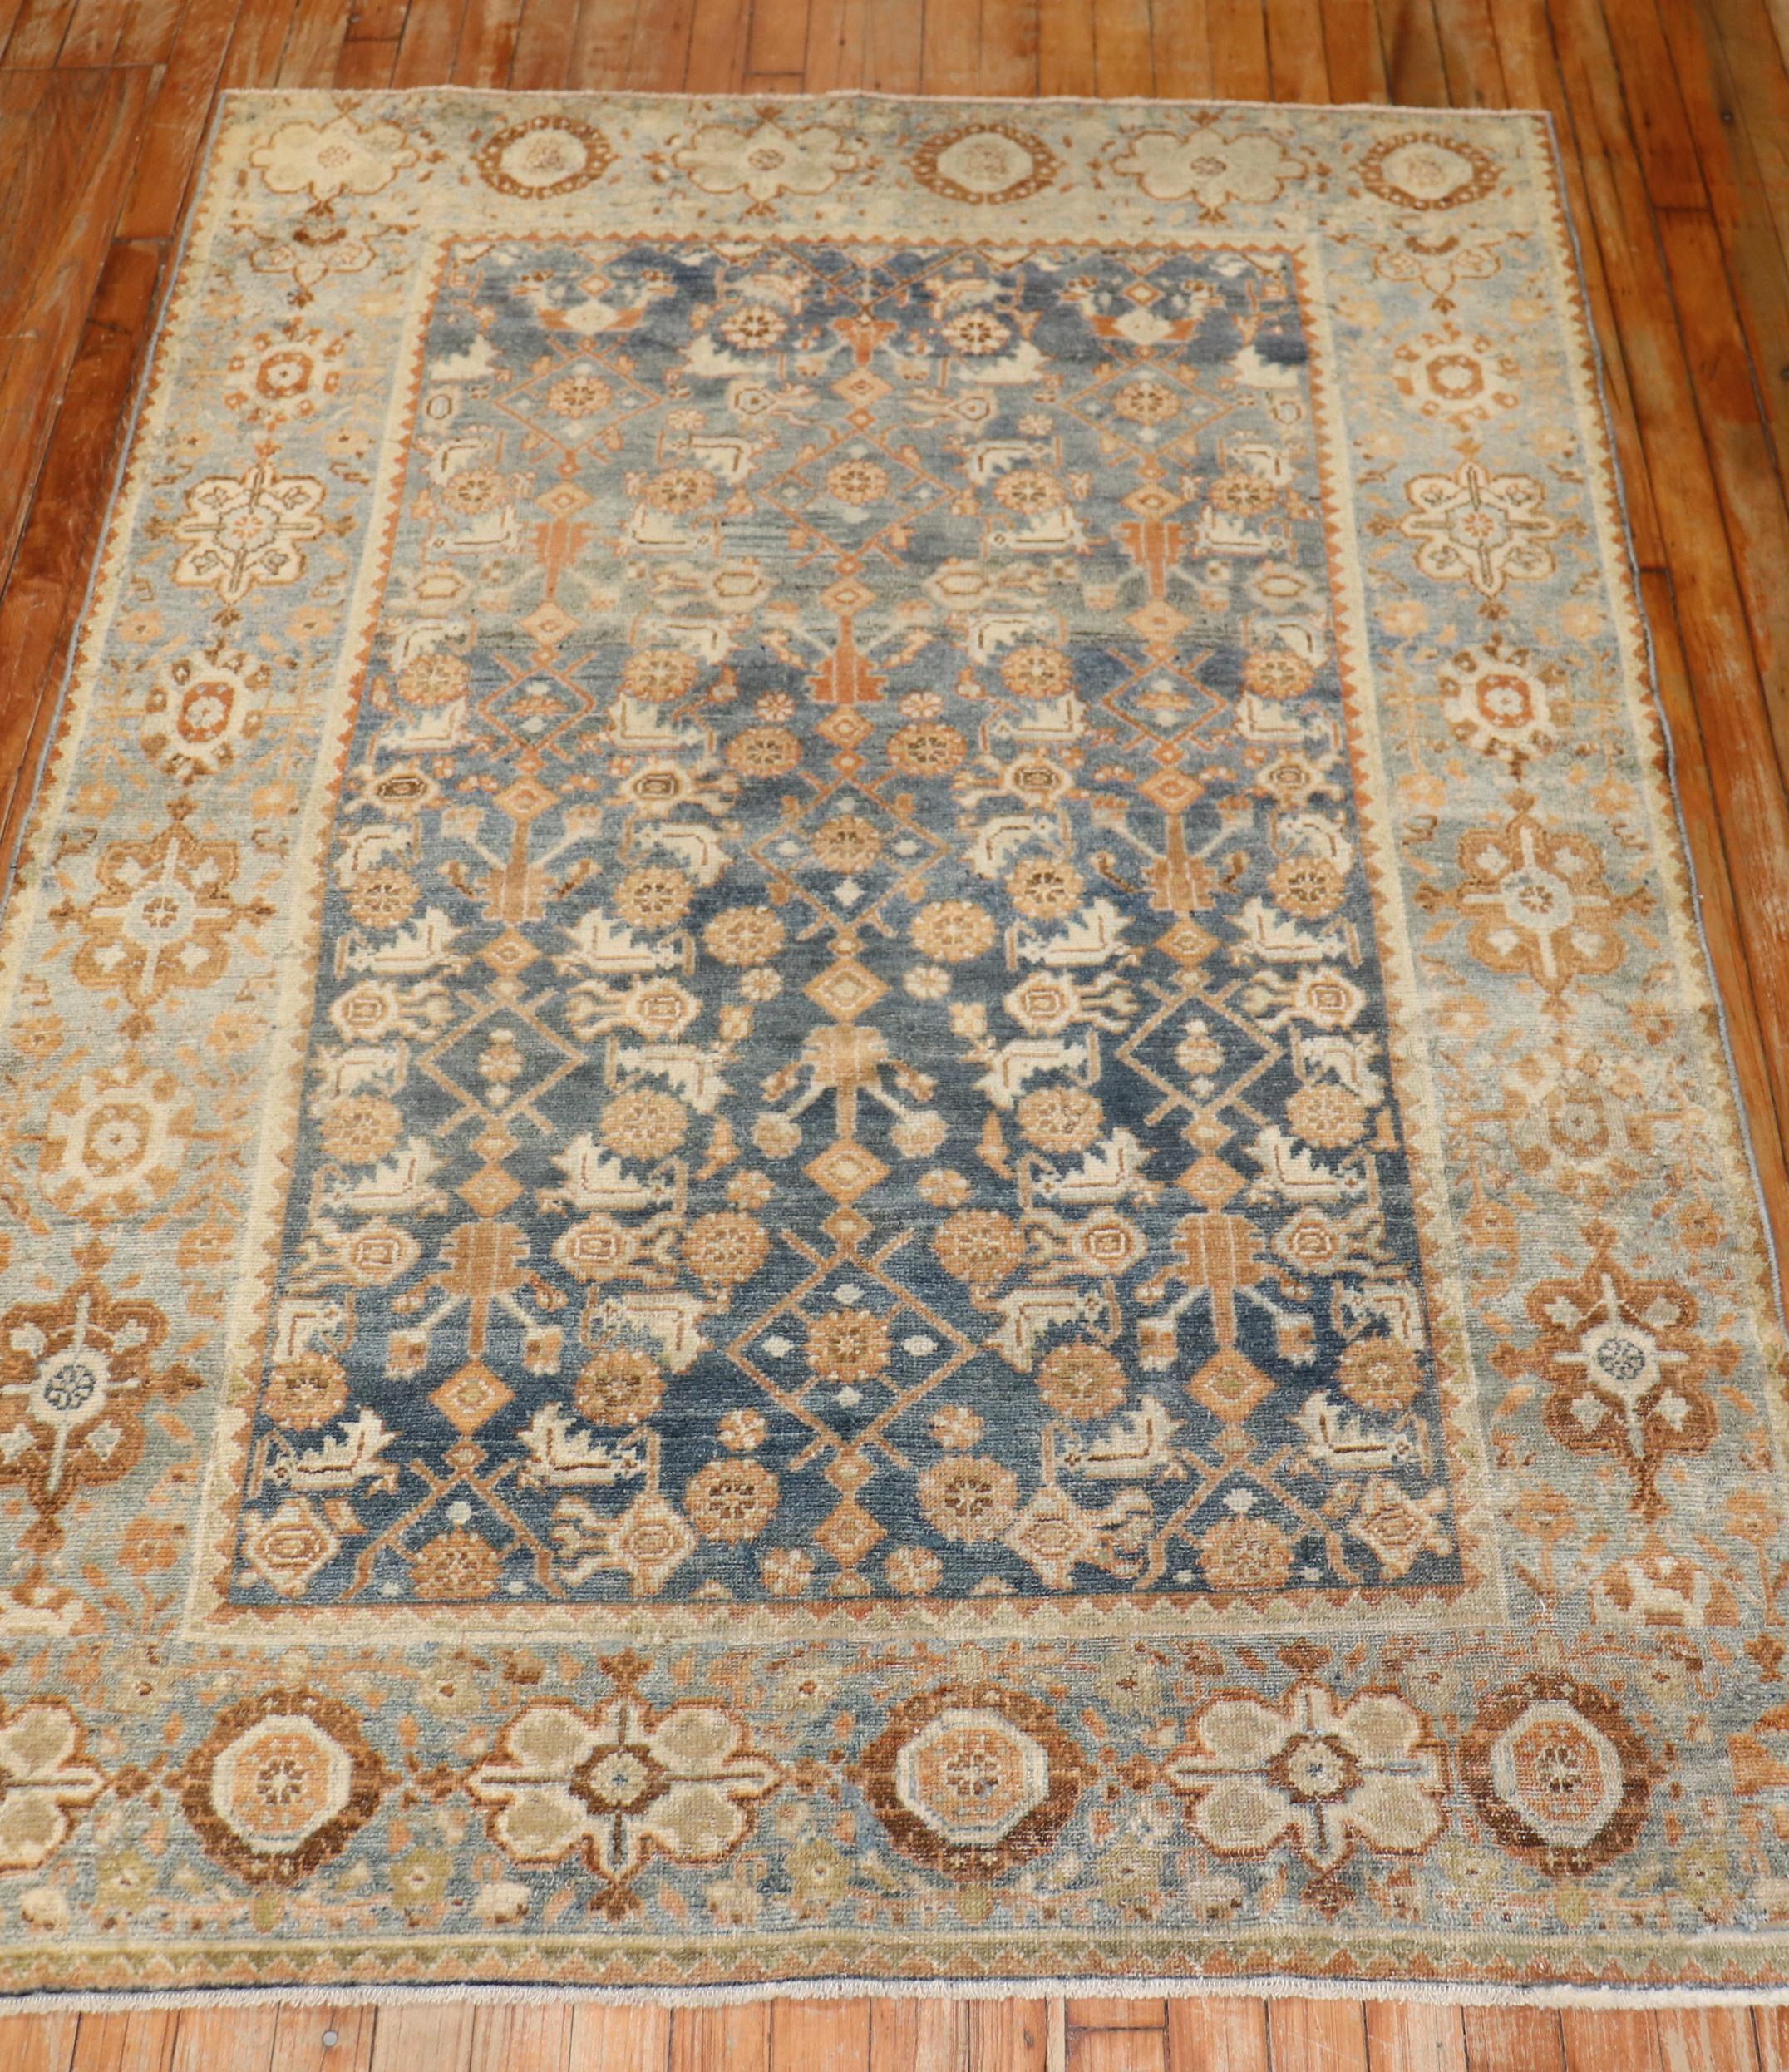 A large accent size early 20th century Persian Malayer rug.

Measures: 4'3